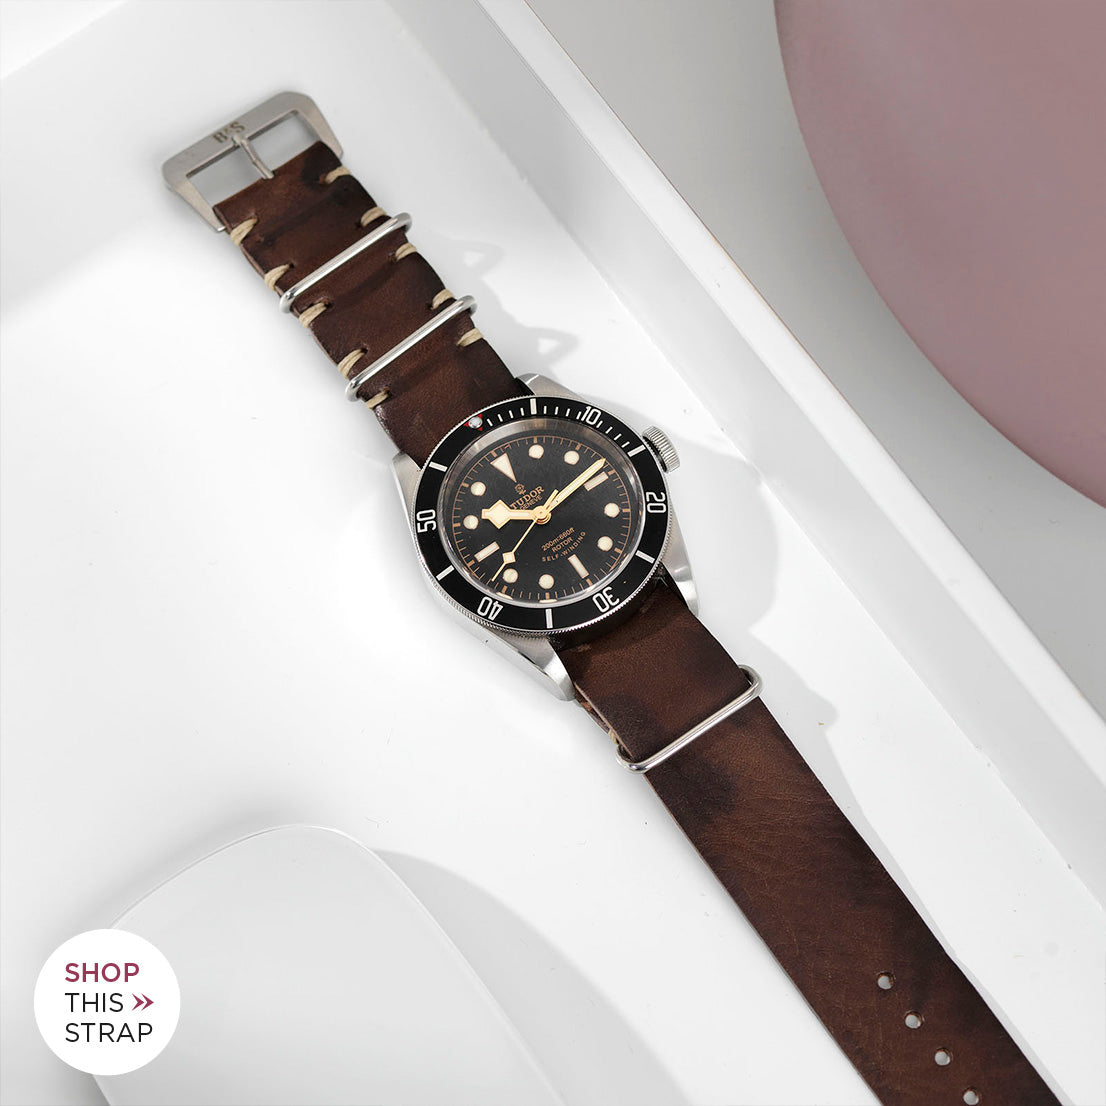 Bulang and Sons_Strap Guide_The Tudor Black Bay Black 79220N_Lumberjack Brown Nato Leather Watch Strap